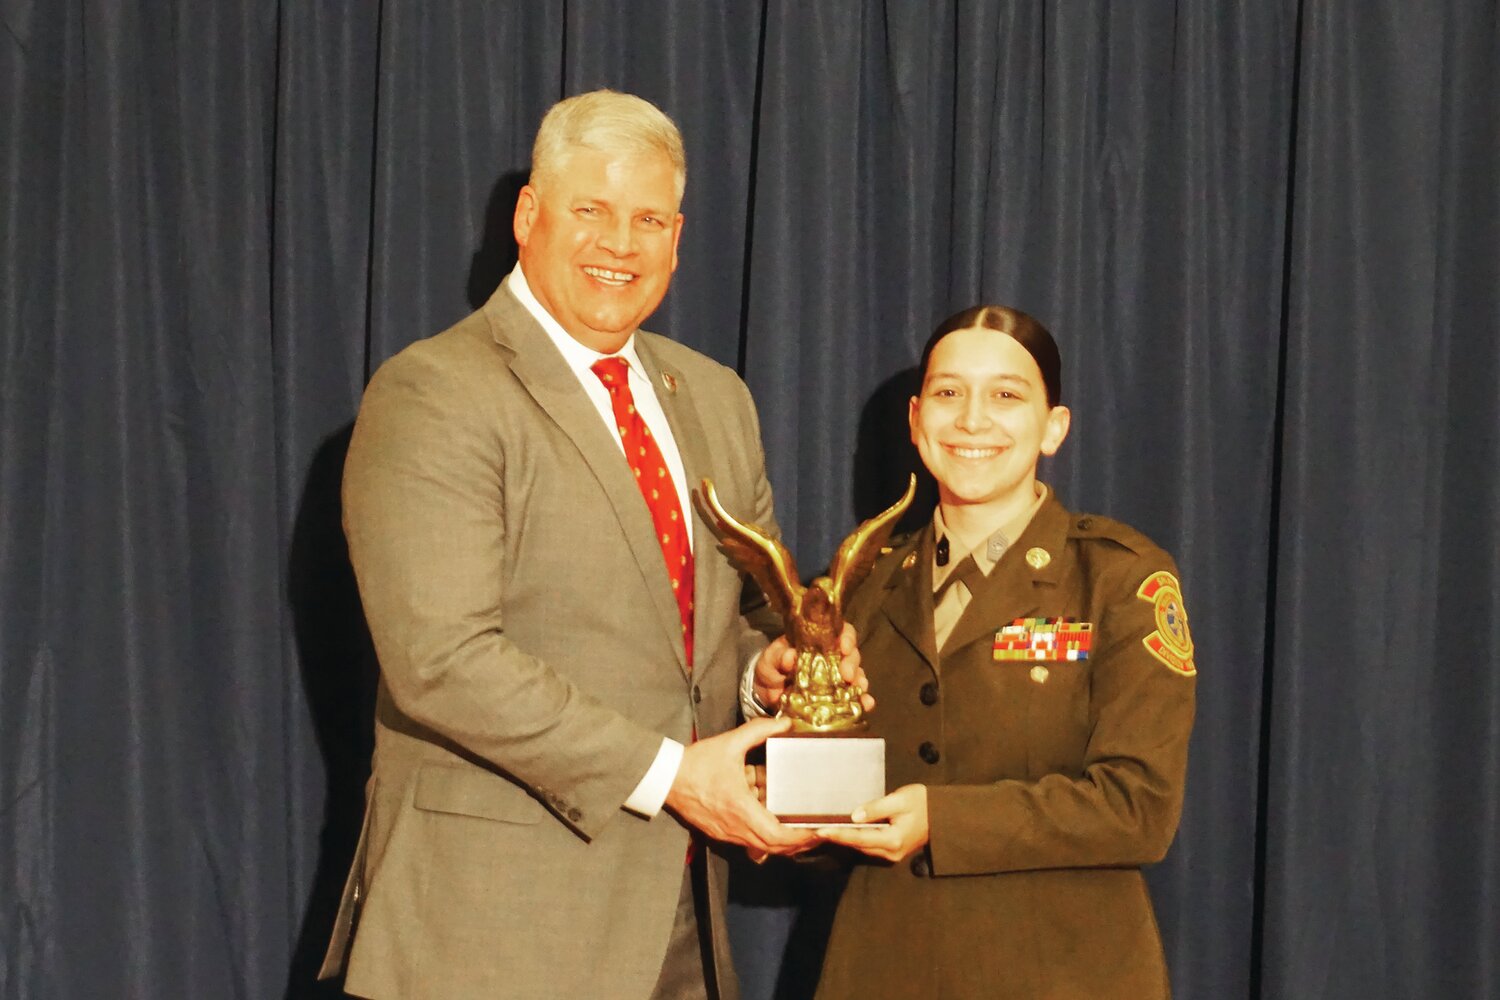 Susan Suber of Pipersville receives the National Young Marine of the Year Award from Col. William P. Davis USMC (retired), national executive director and CEO of the Young Marines.